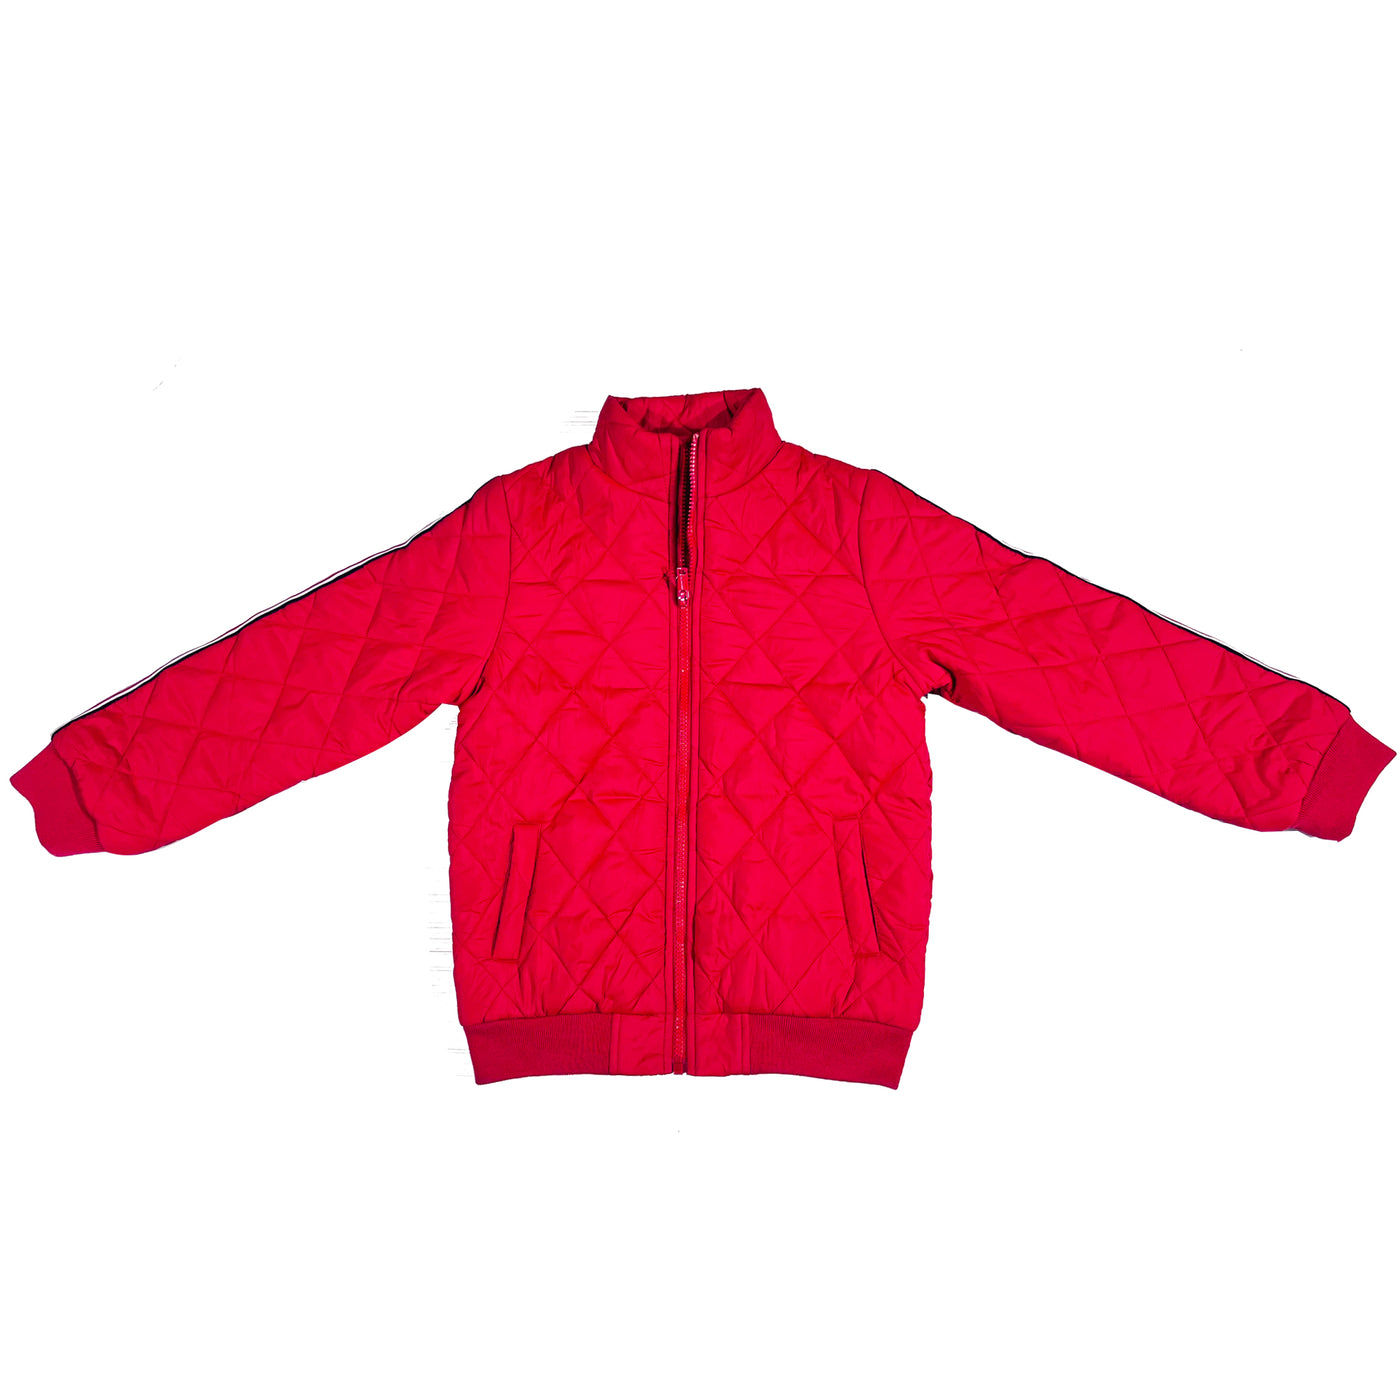 The white cub red puffer jacket Jacket The White Cub   